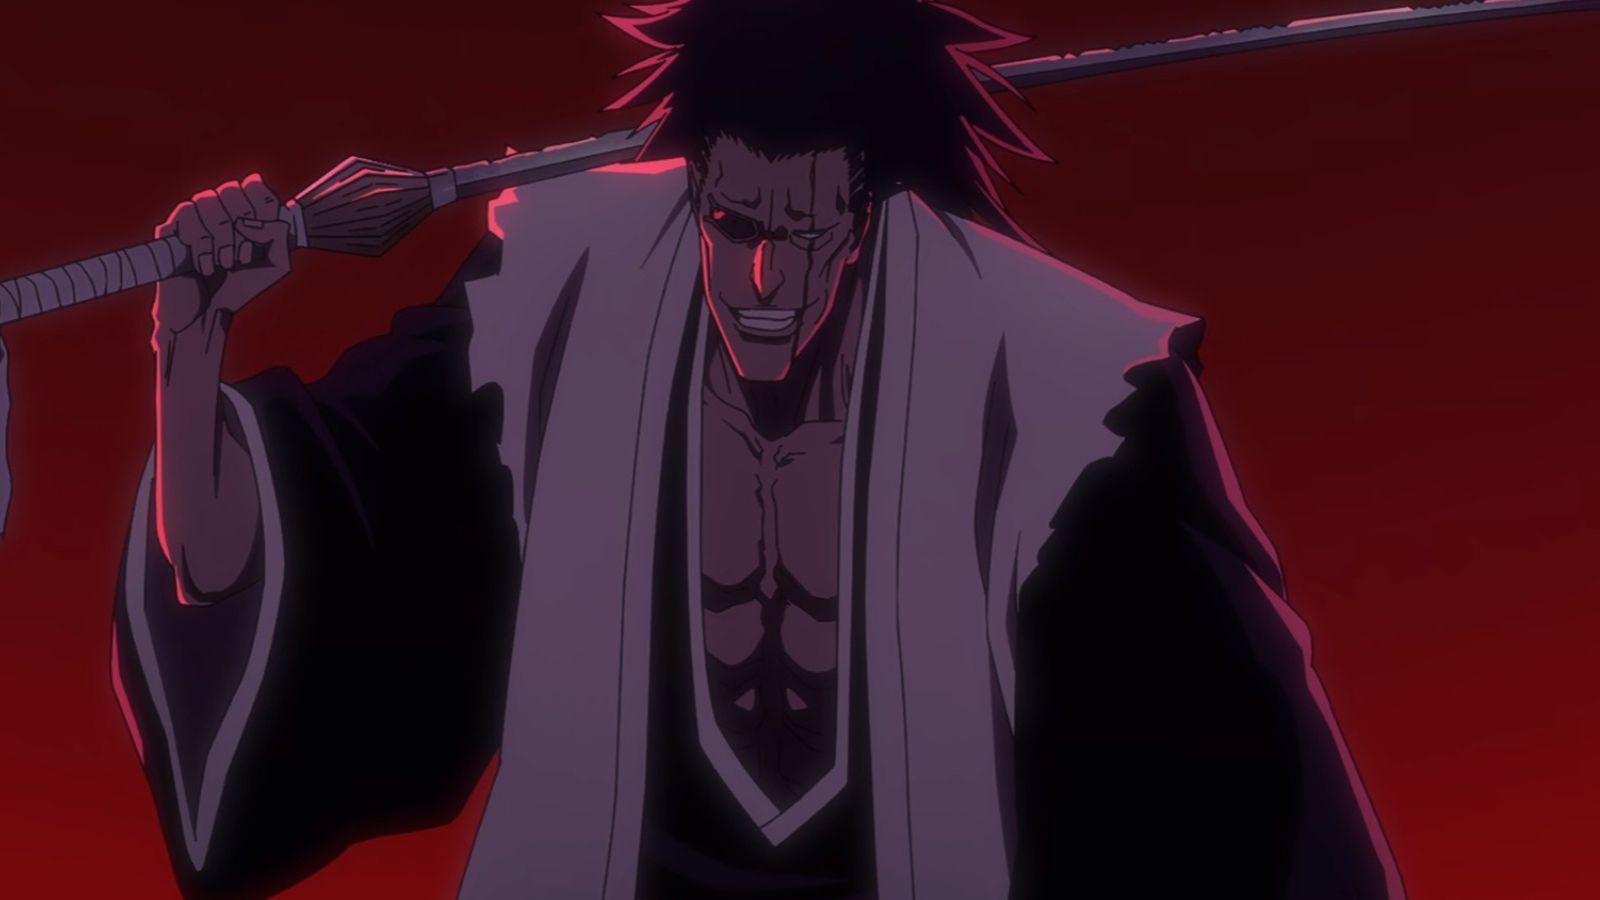 Bleach TYBW Episode 5 Release Date, Time, And Synopsis